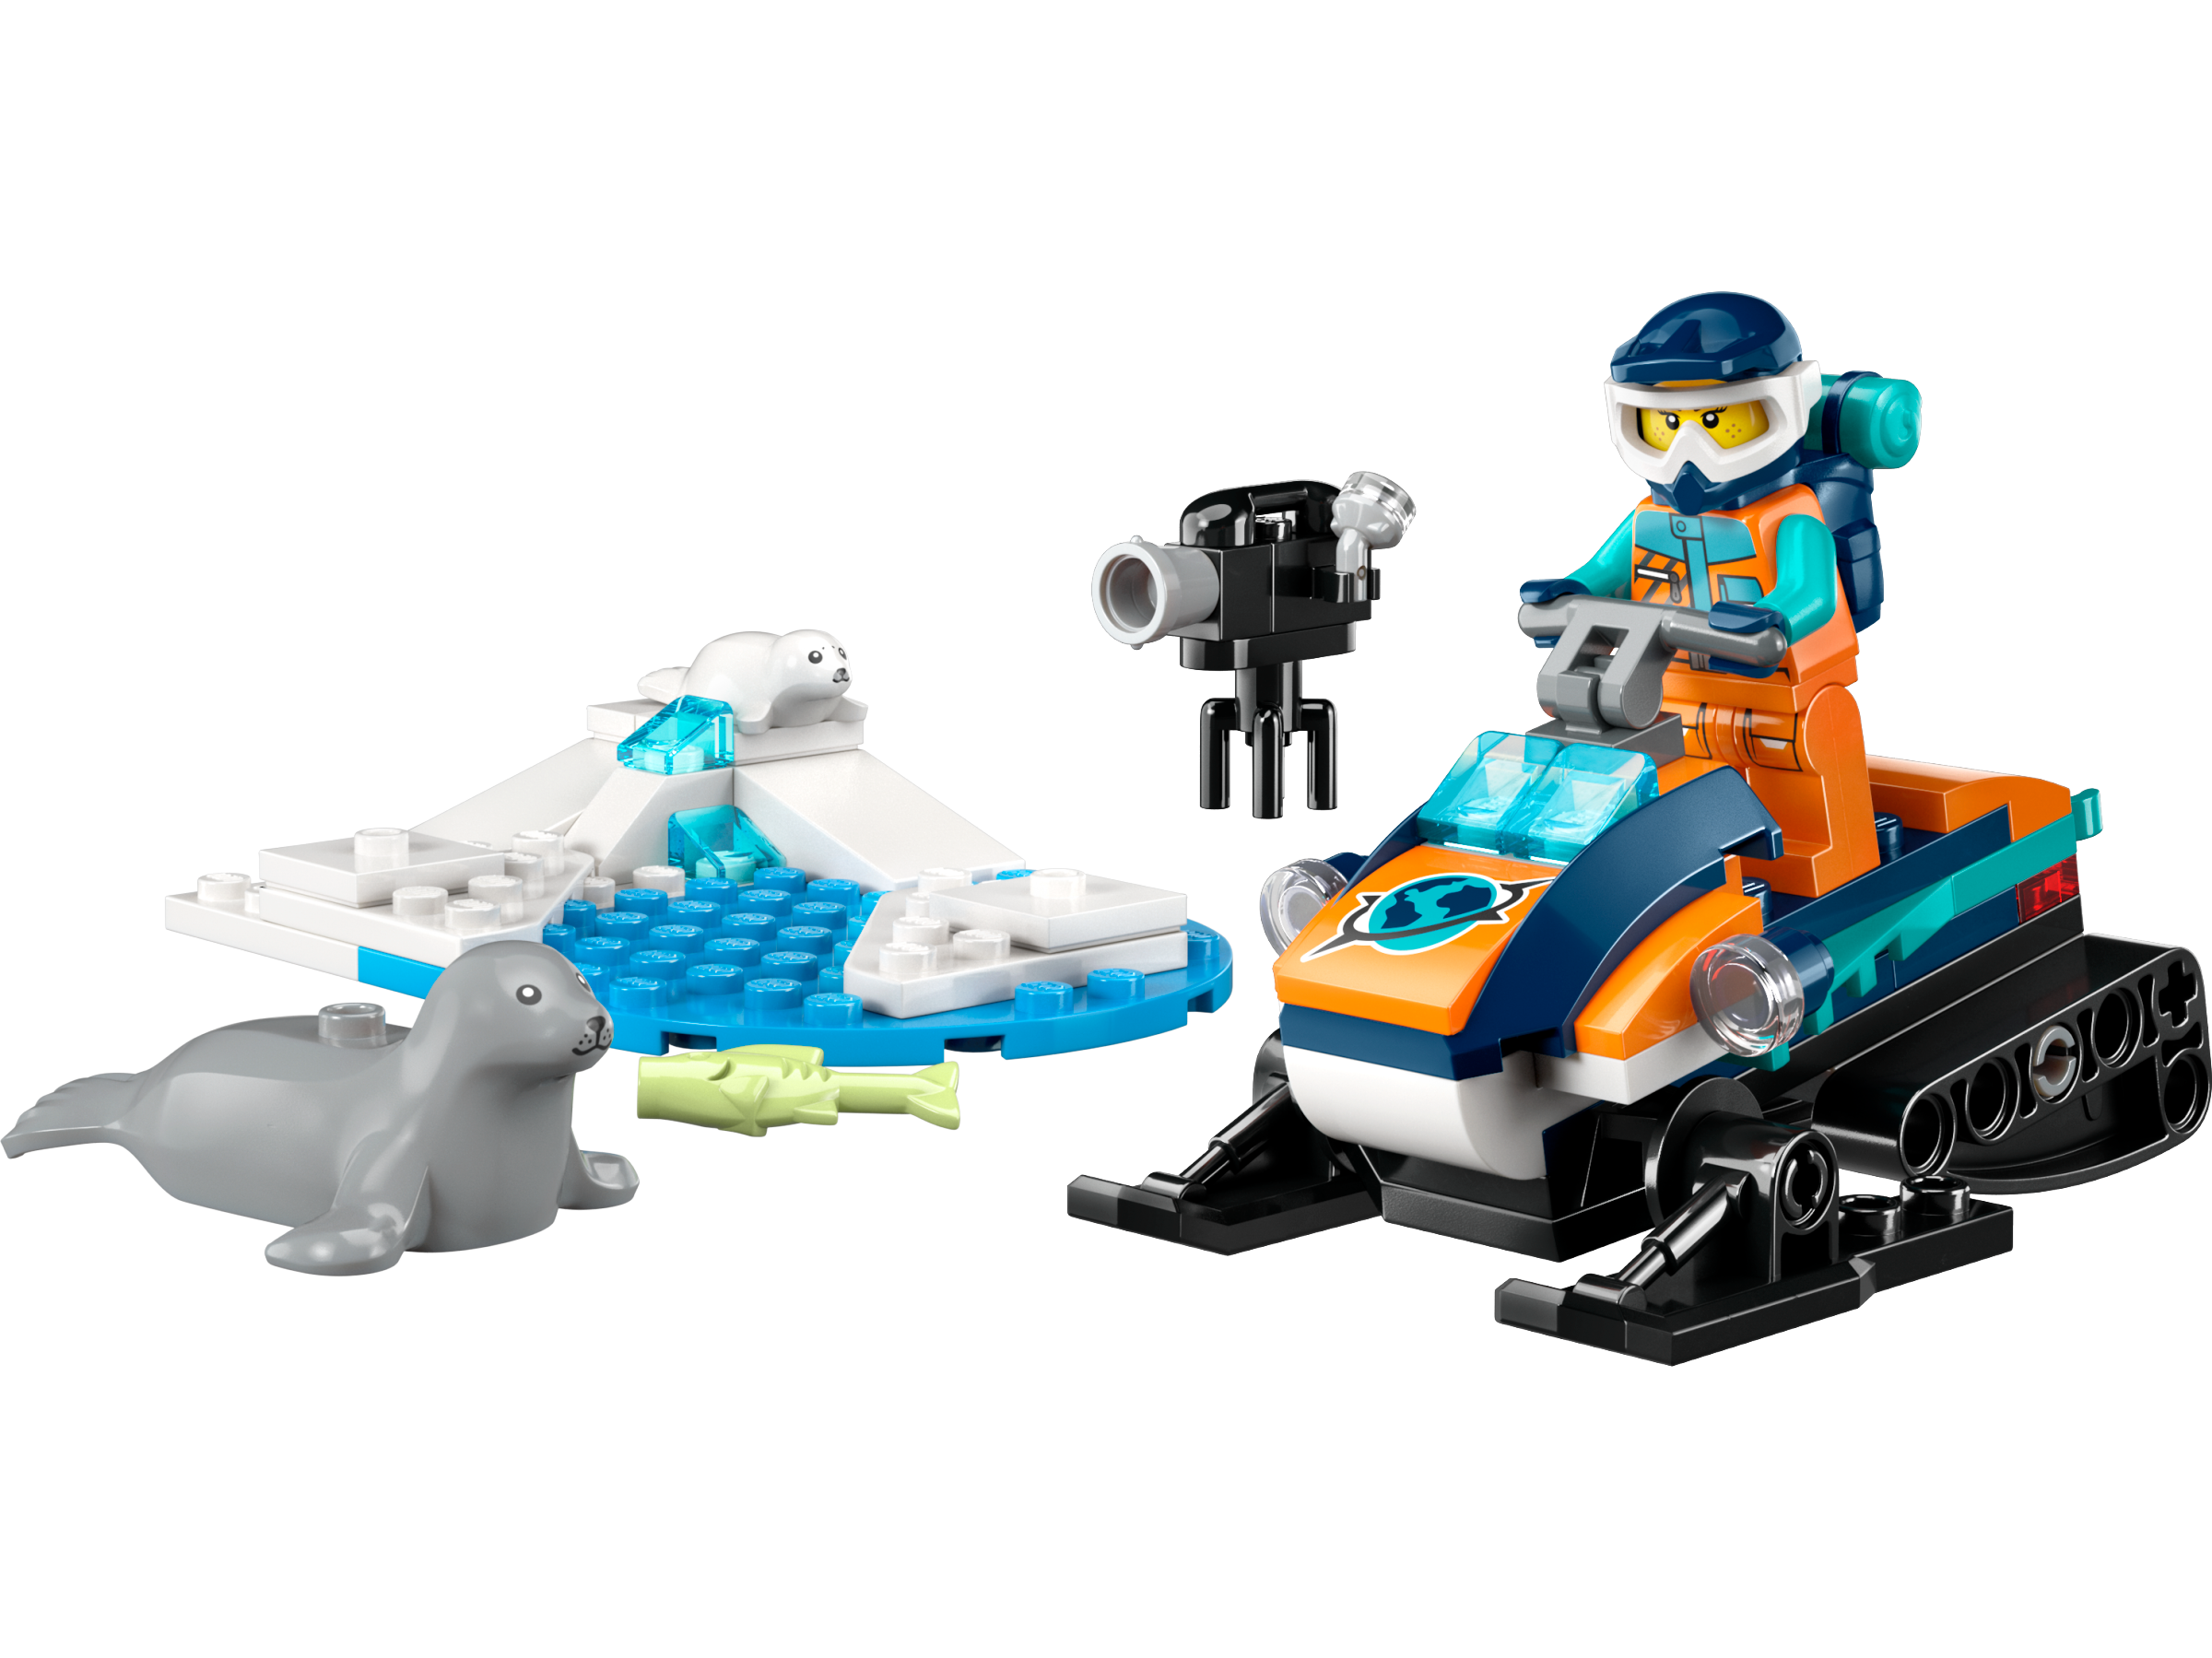 Arctic Explorer Snowmobile 60376 | City | Buy online at the